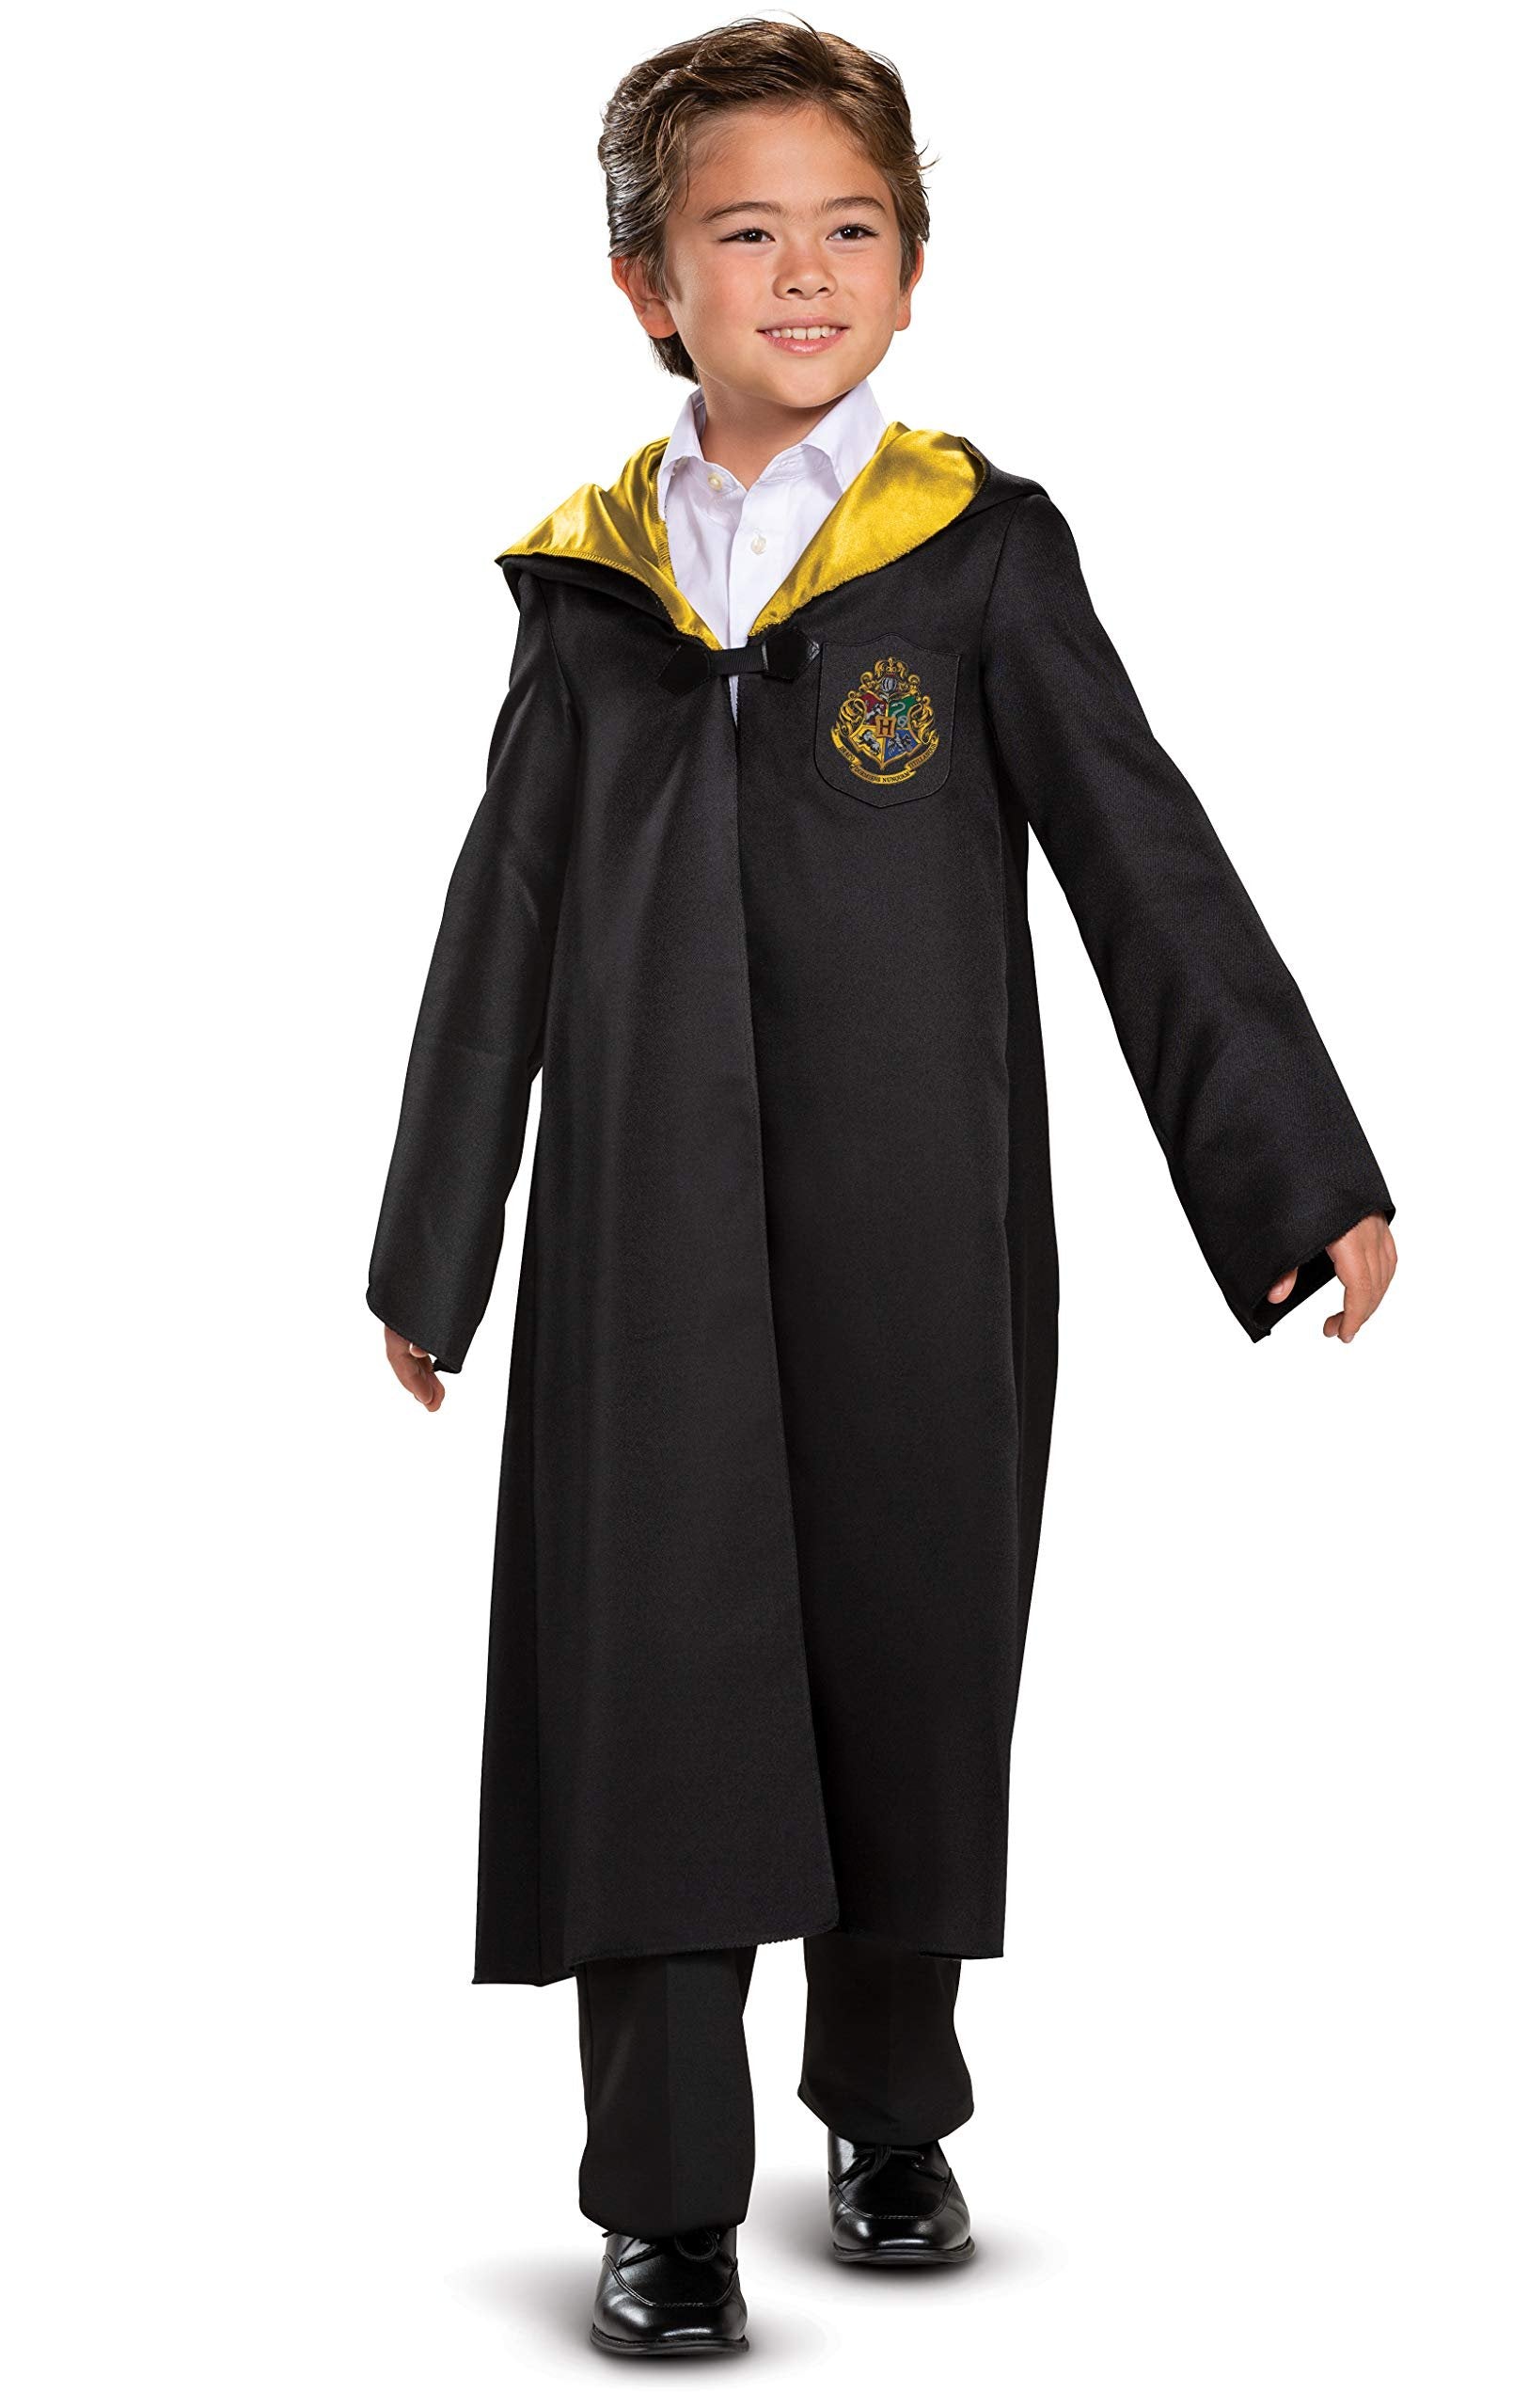 Disguise Harry Potter Hogwarts Robe, Official Wizarding World Costume Robes, Classic Kids Size Dress Up Accessory, Child Size Large (10-12), Black & Gold